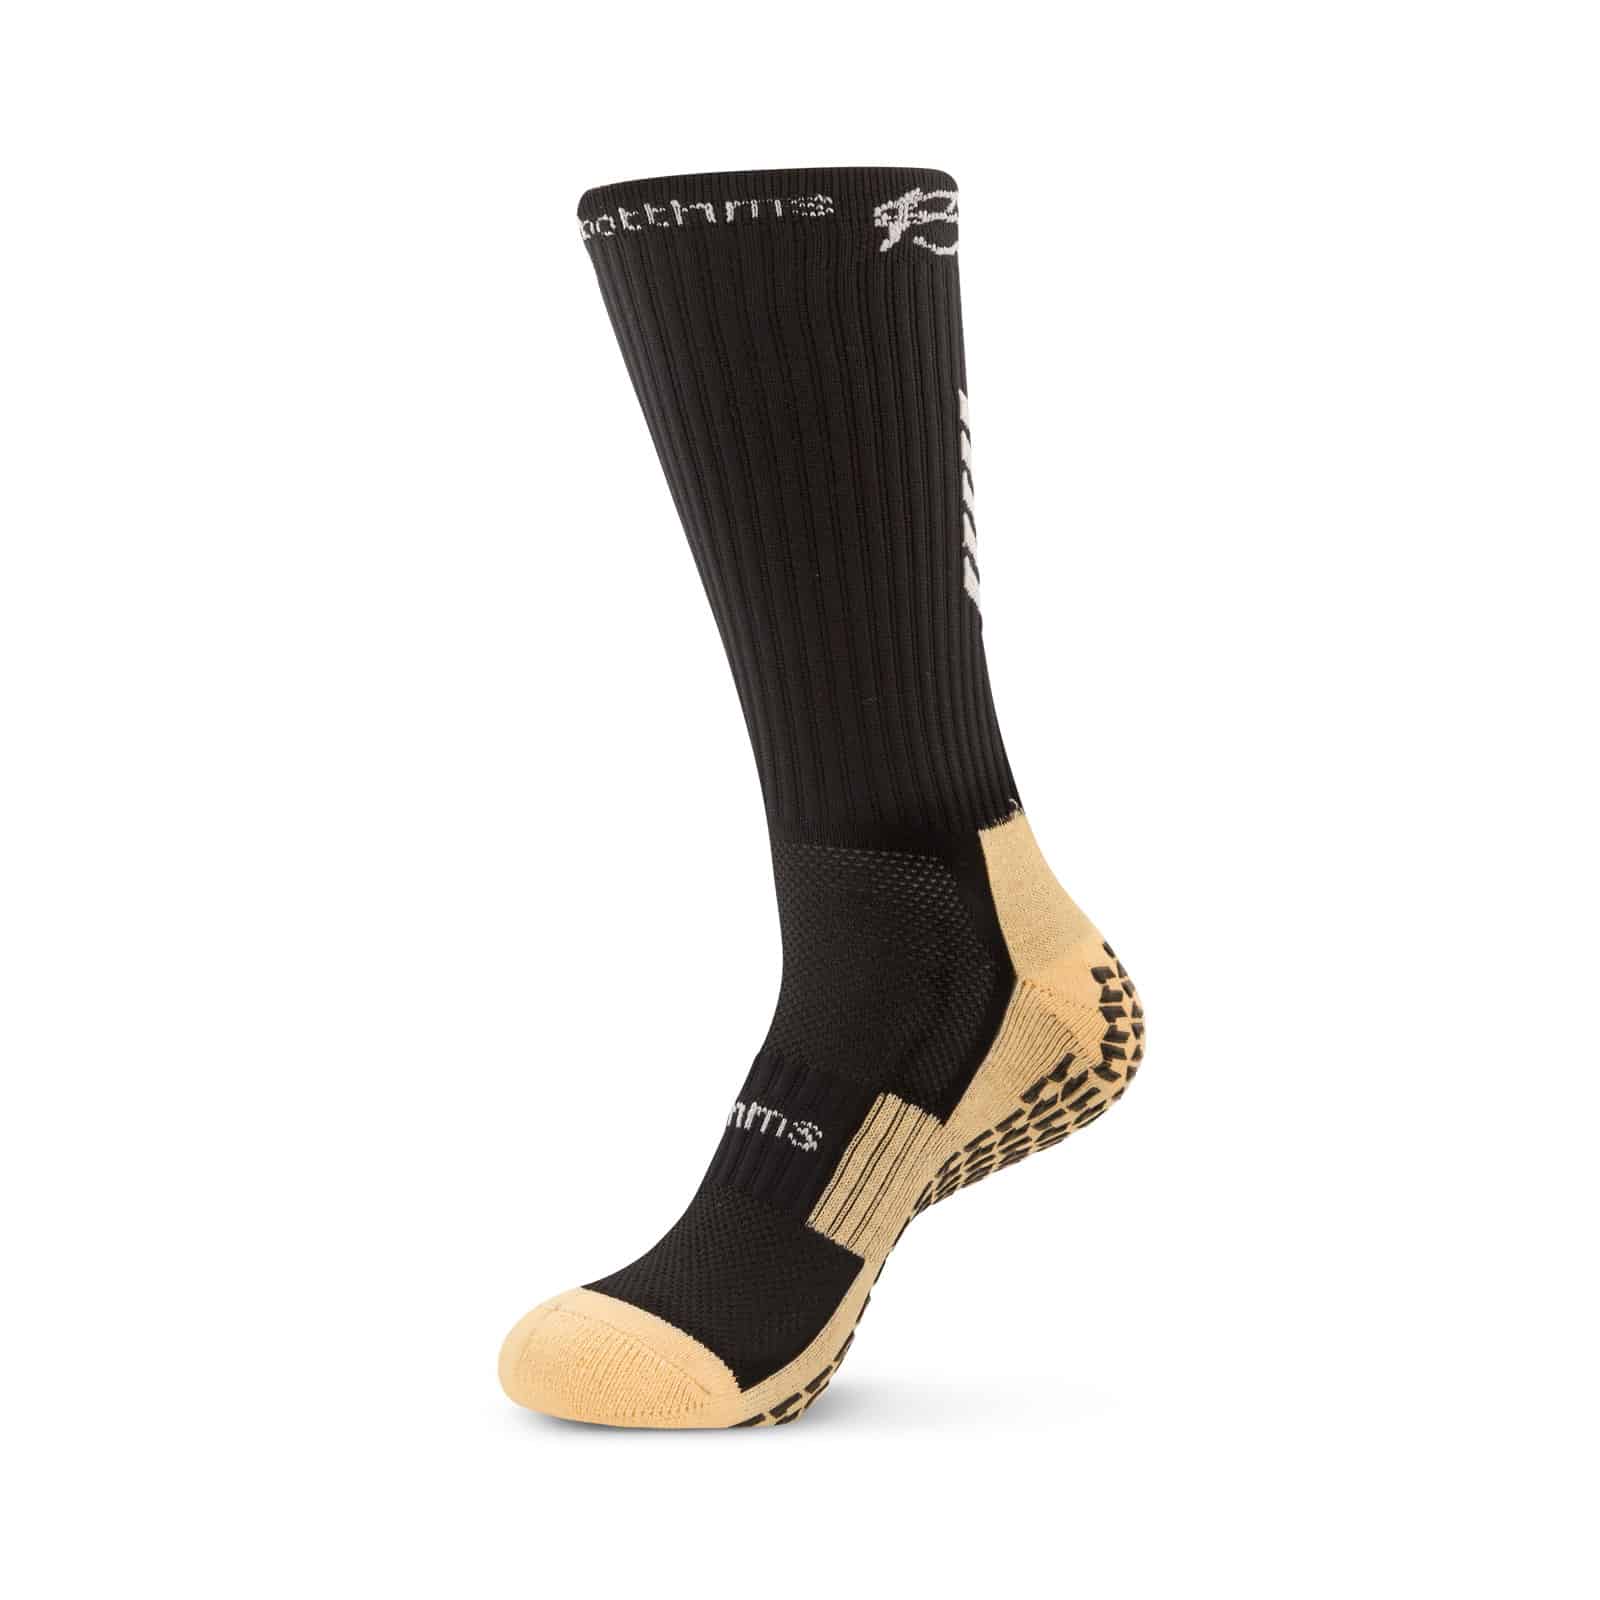 products/BTTHMS_TECH_SOCK3069_Black.jpgproducts/BTTHMS_TECH_SOCK3062_Black.jpgproducts/BTTHMS_TECH_SOCK3070_Black.jpgproducts/BTTHMS_TECH_SOCK3069_Detail_Black.jpgproducts/BTTHMS_TECH_SOCK3062_Detail_Black.jpg